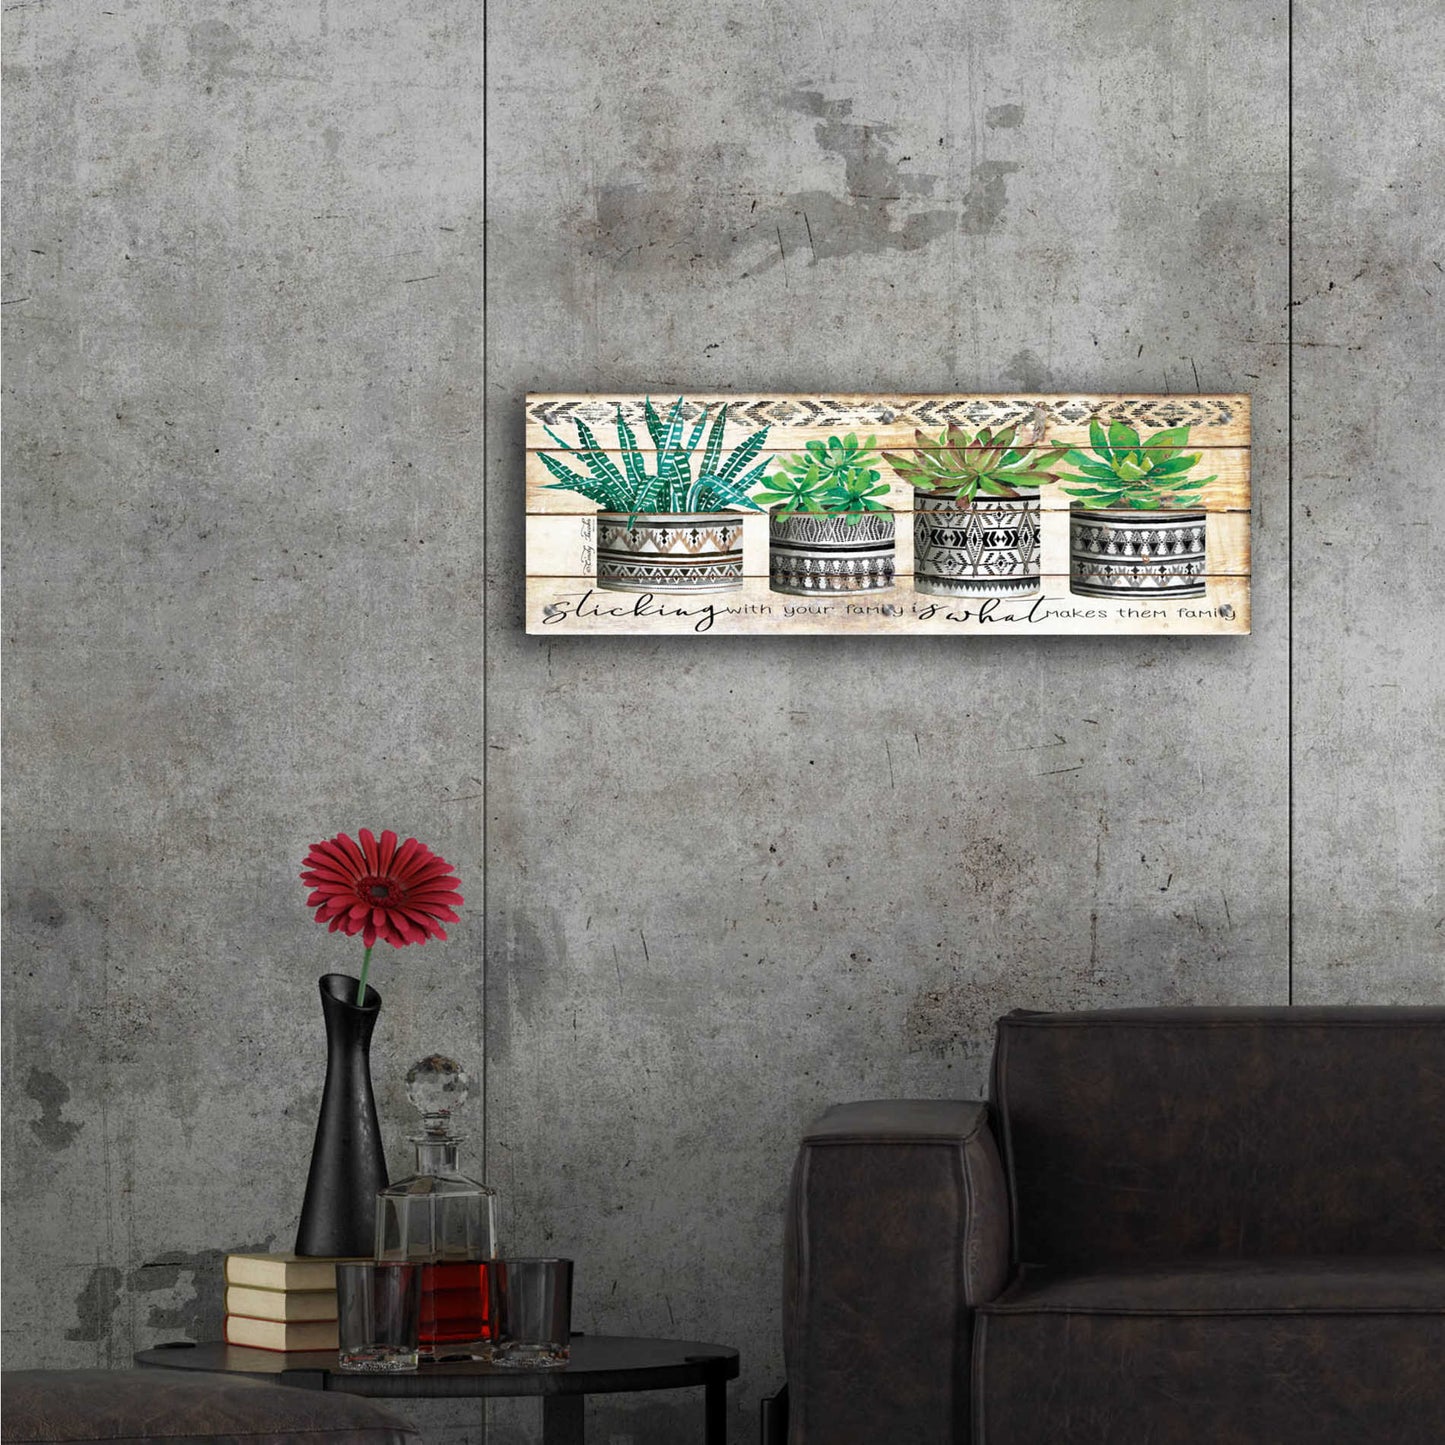 Epic Art 'Sticking with Your Family' by Cindy Jacobs, Acrylic Glass Wall Art,36x12